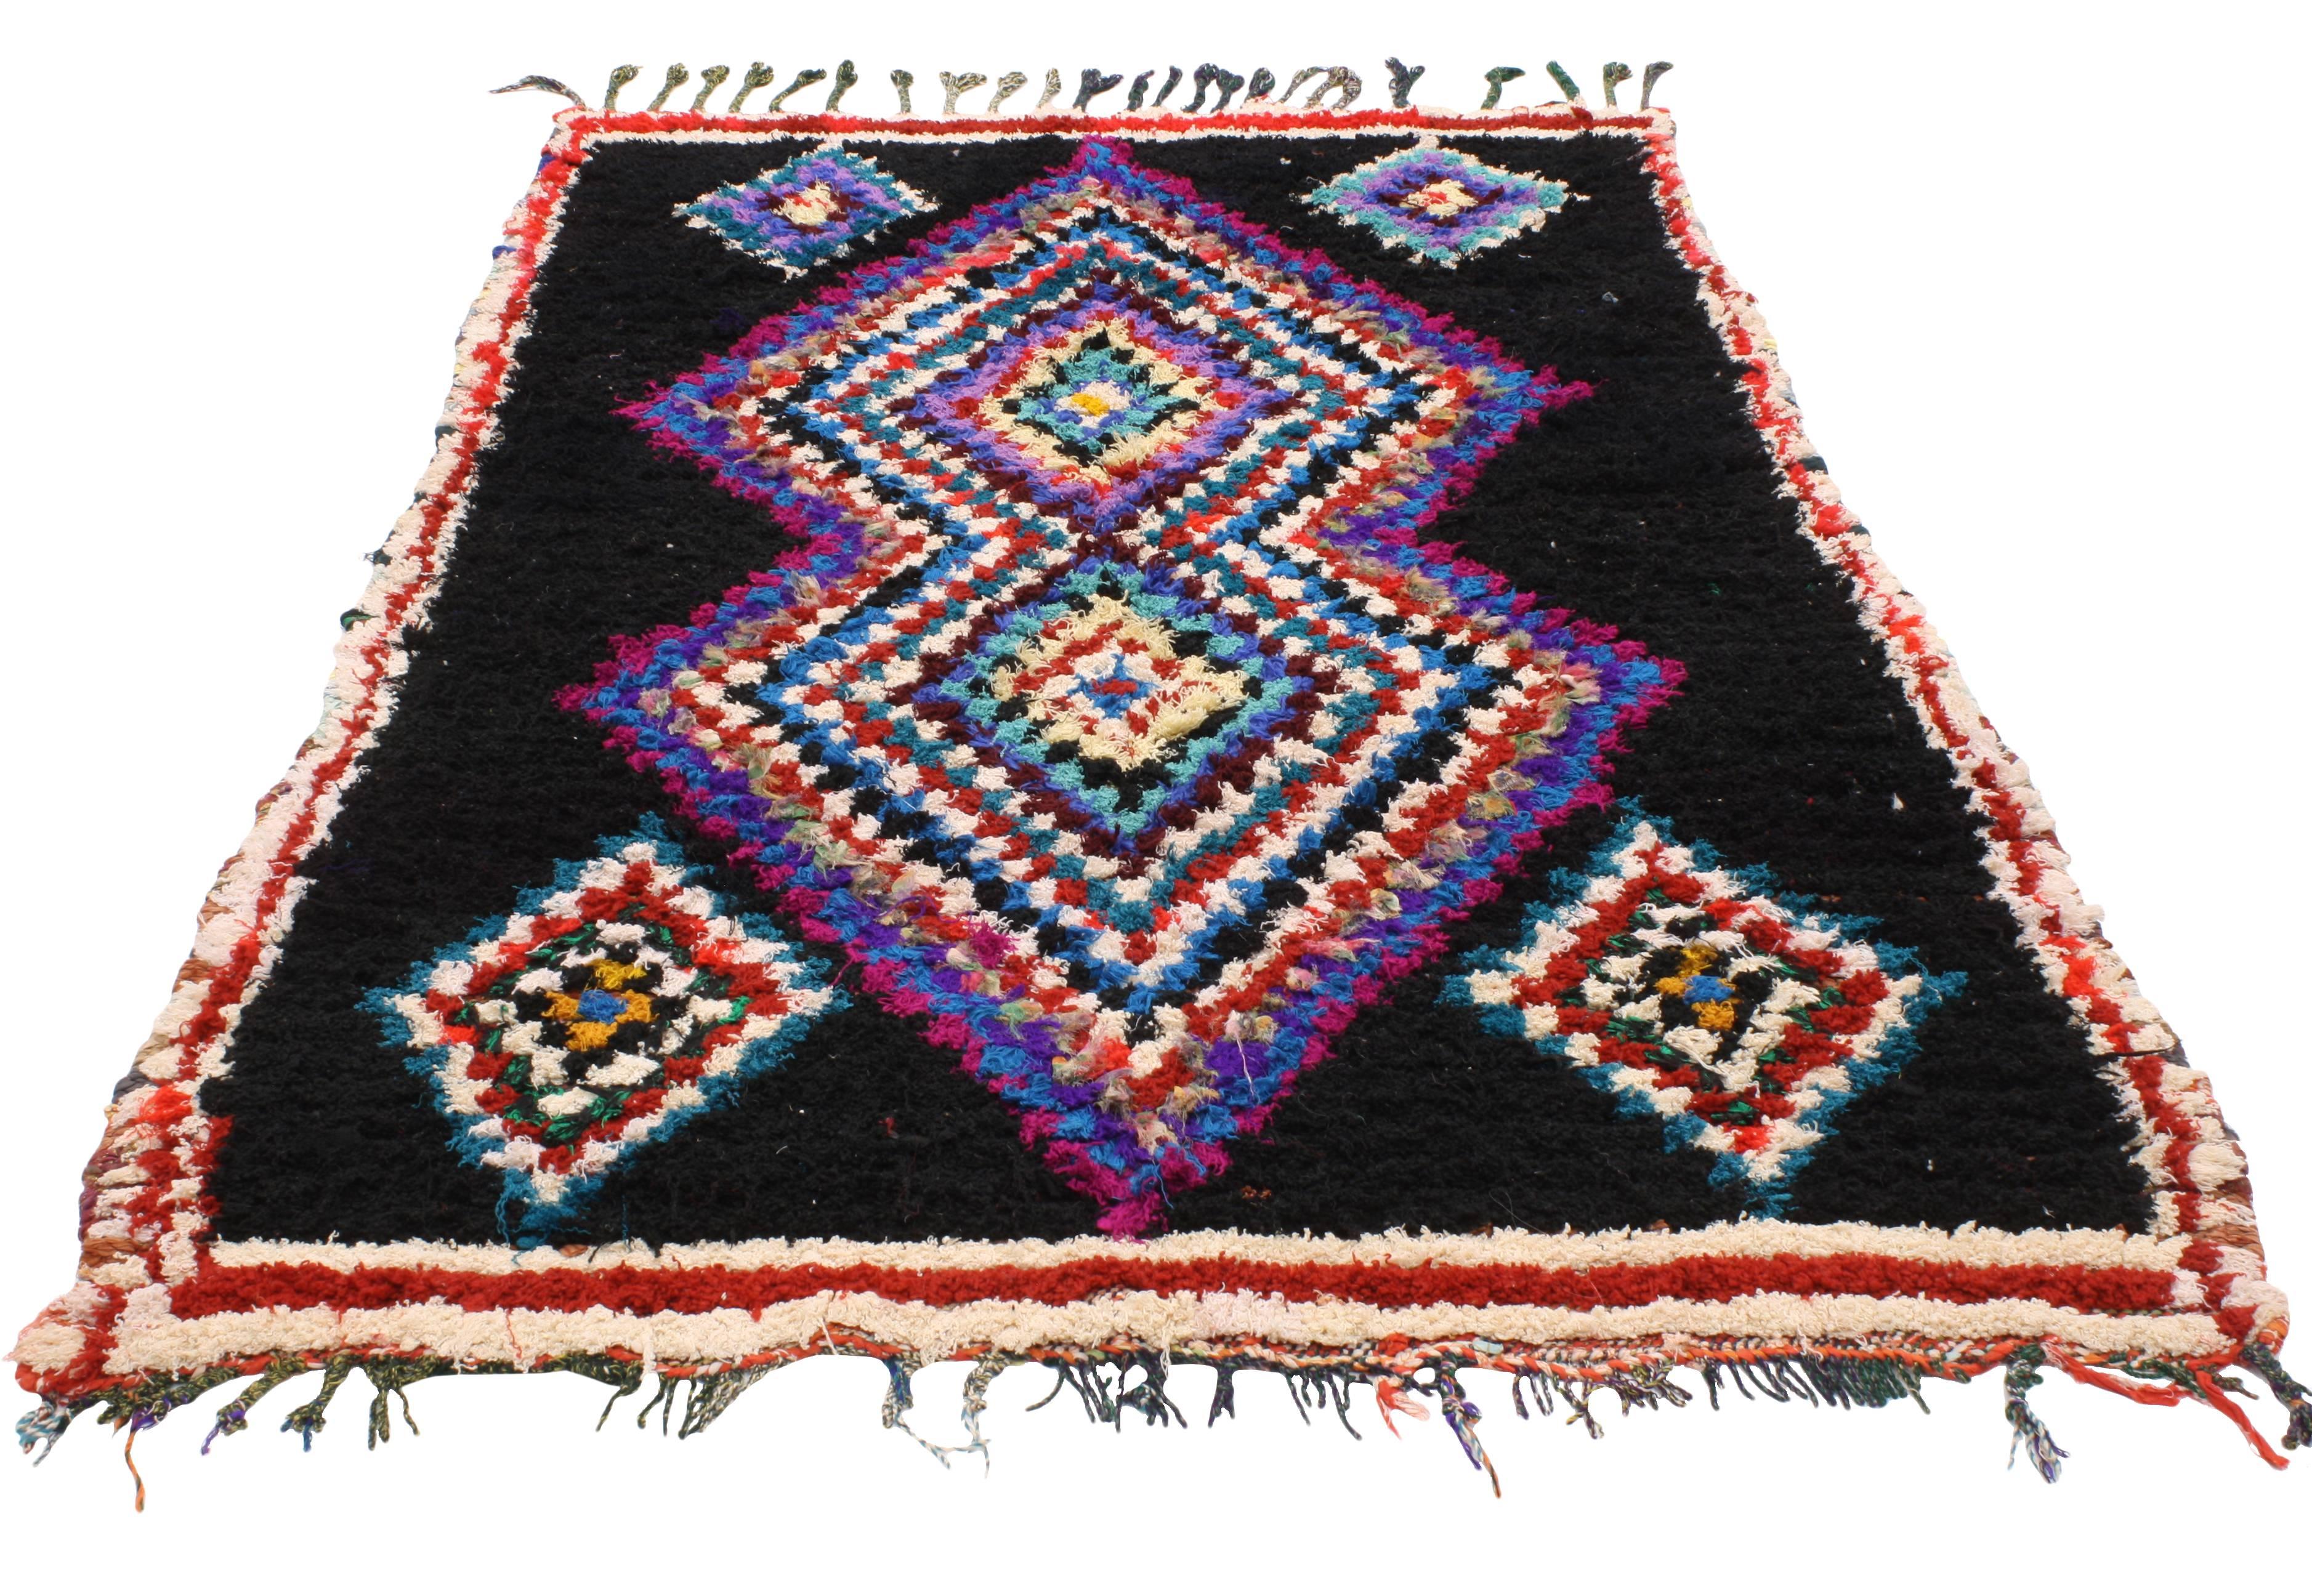 Hand-Knotted Vintage Berber Moroccan Rug with Boho Chic Tribal Style